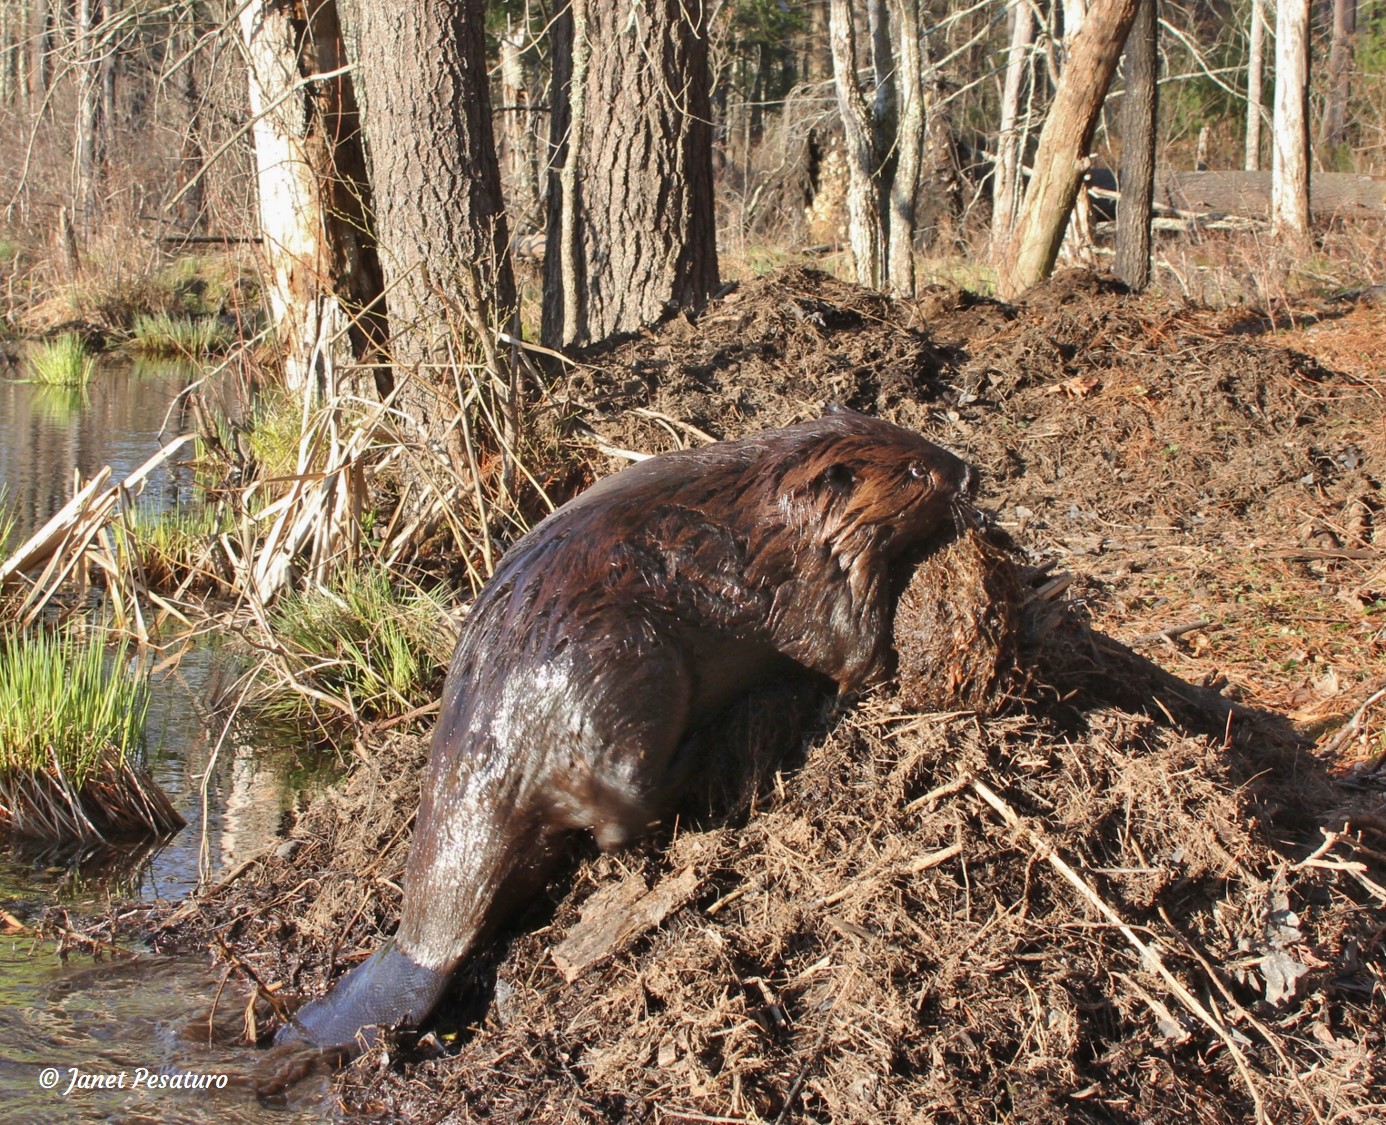 a beaver scent marking by piling debris on its mound and depositing castoreum